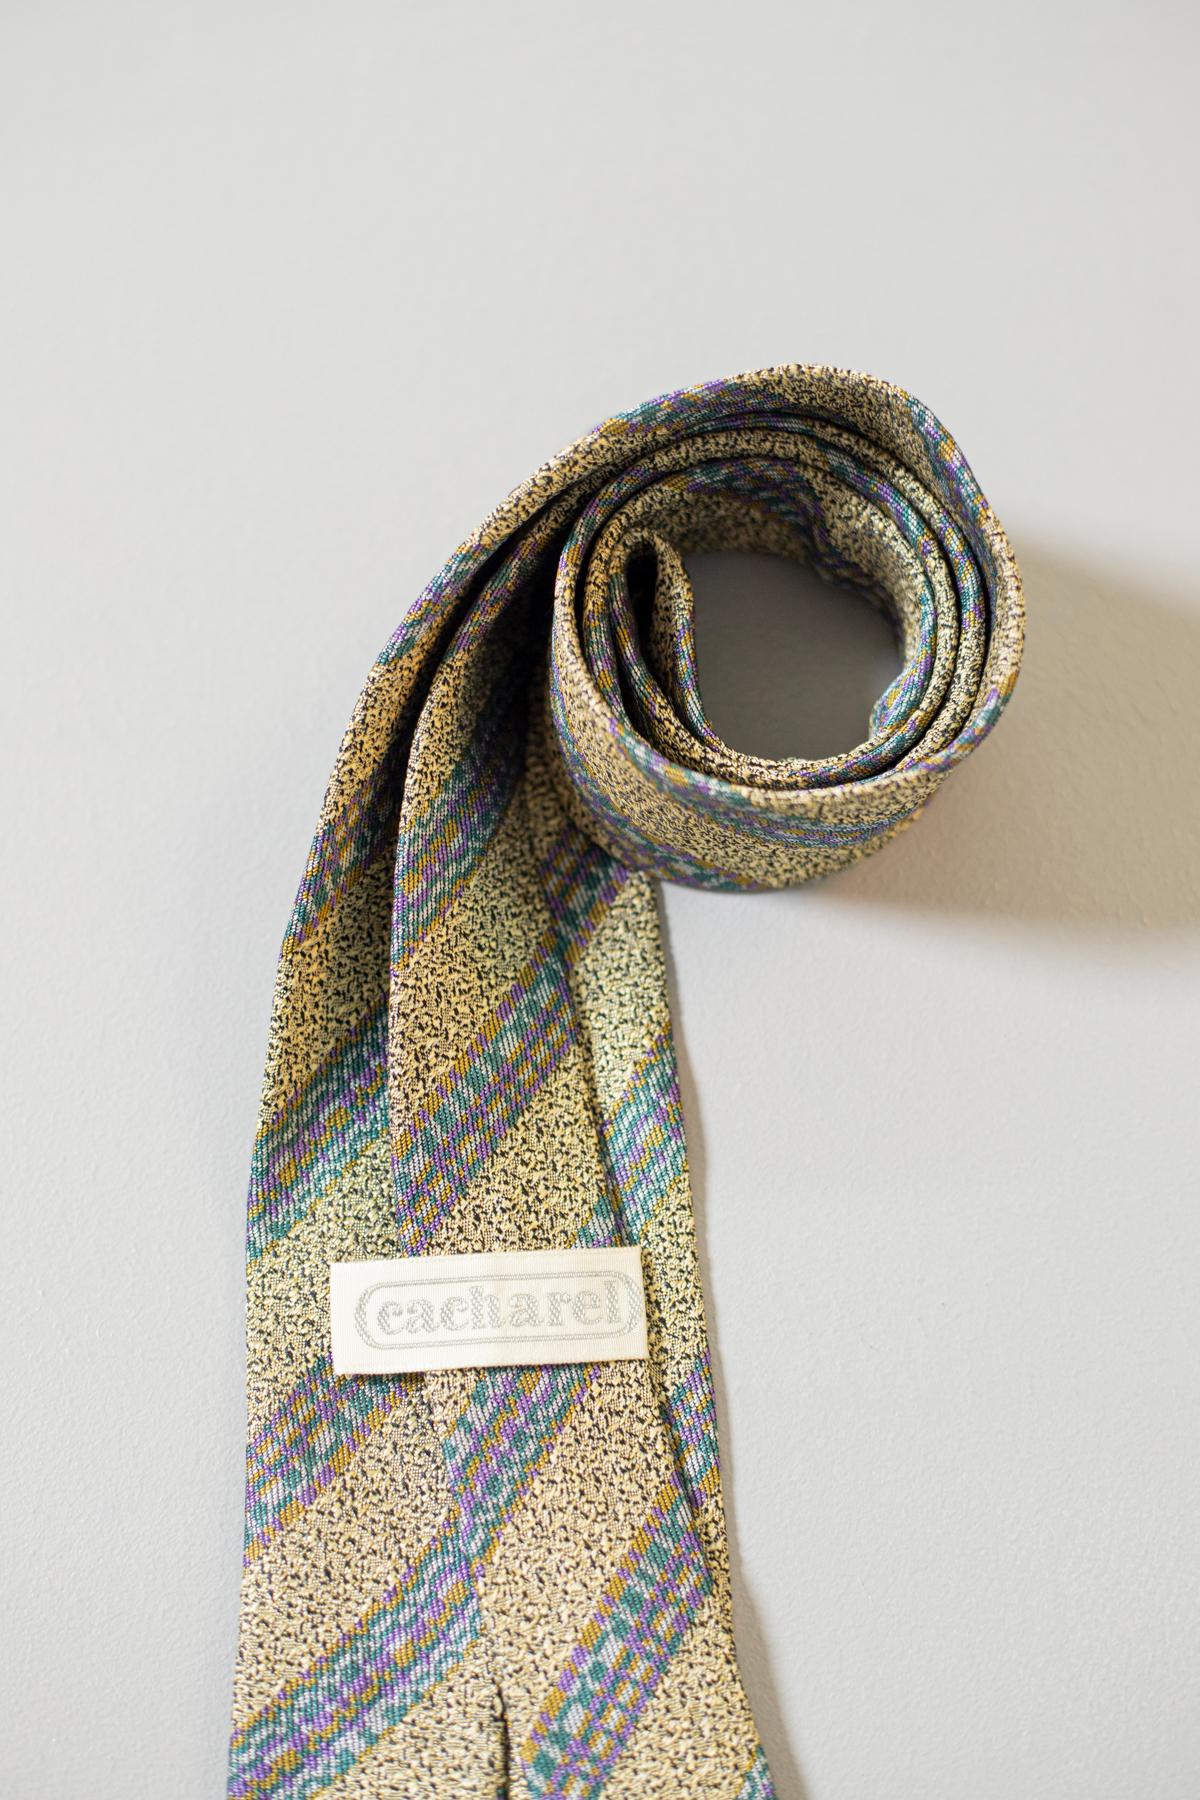 Decorated with jacquard blue, pink, green and yellow stripes on a black and golden background, this tie will spice up your outfit. Made in France and styled by Cacharel is the ideal accessory if you want to liven your outfit for a formal night.